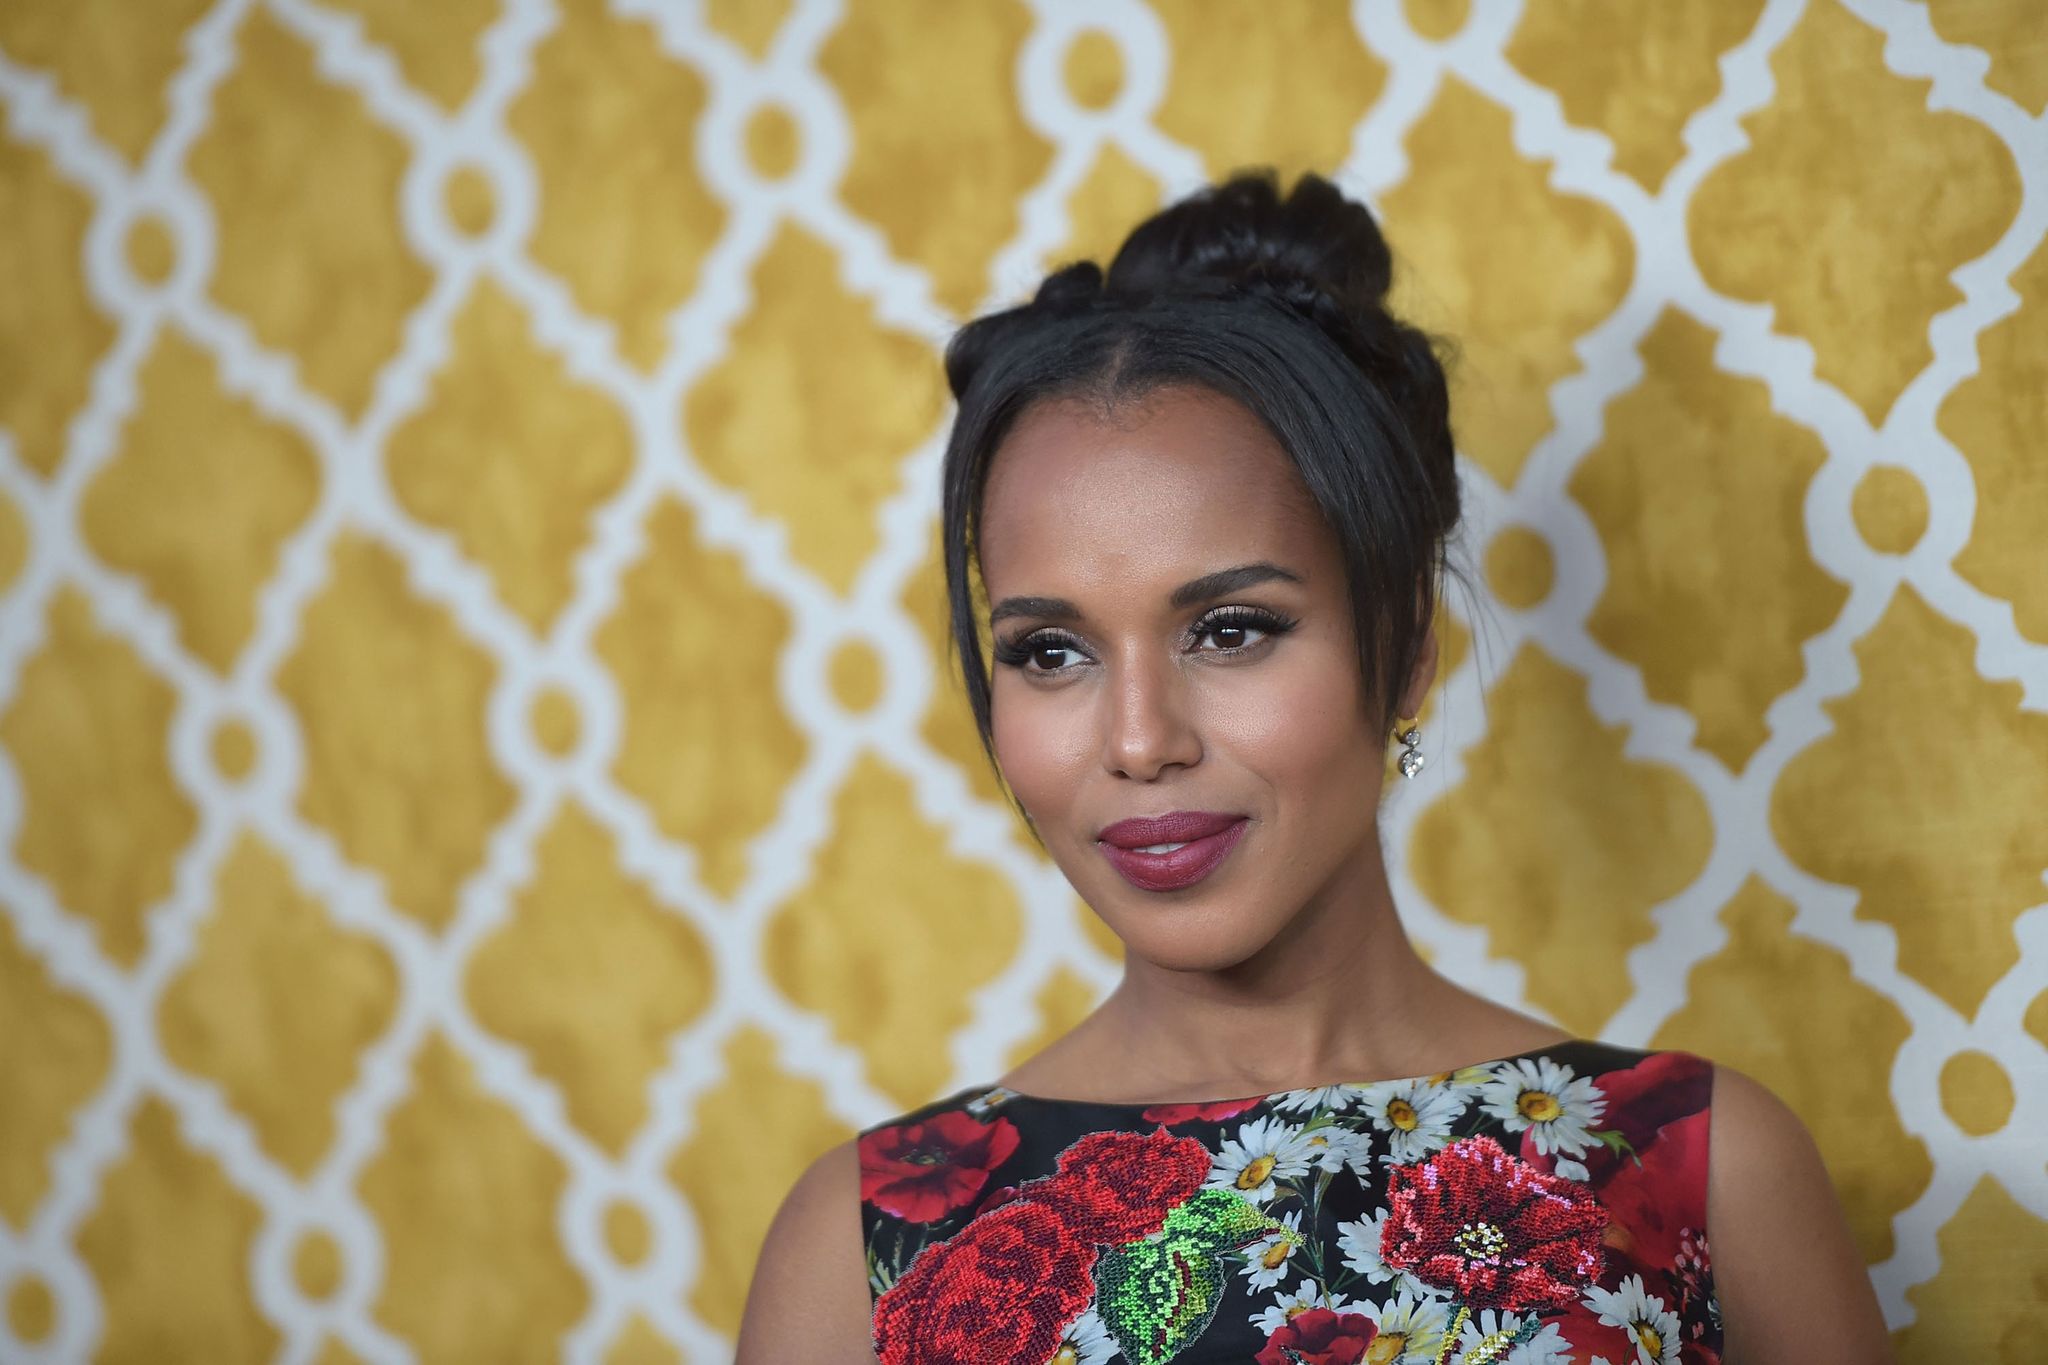 Kerry Washington designs bags for domestic violence victims